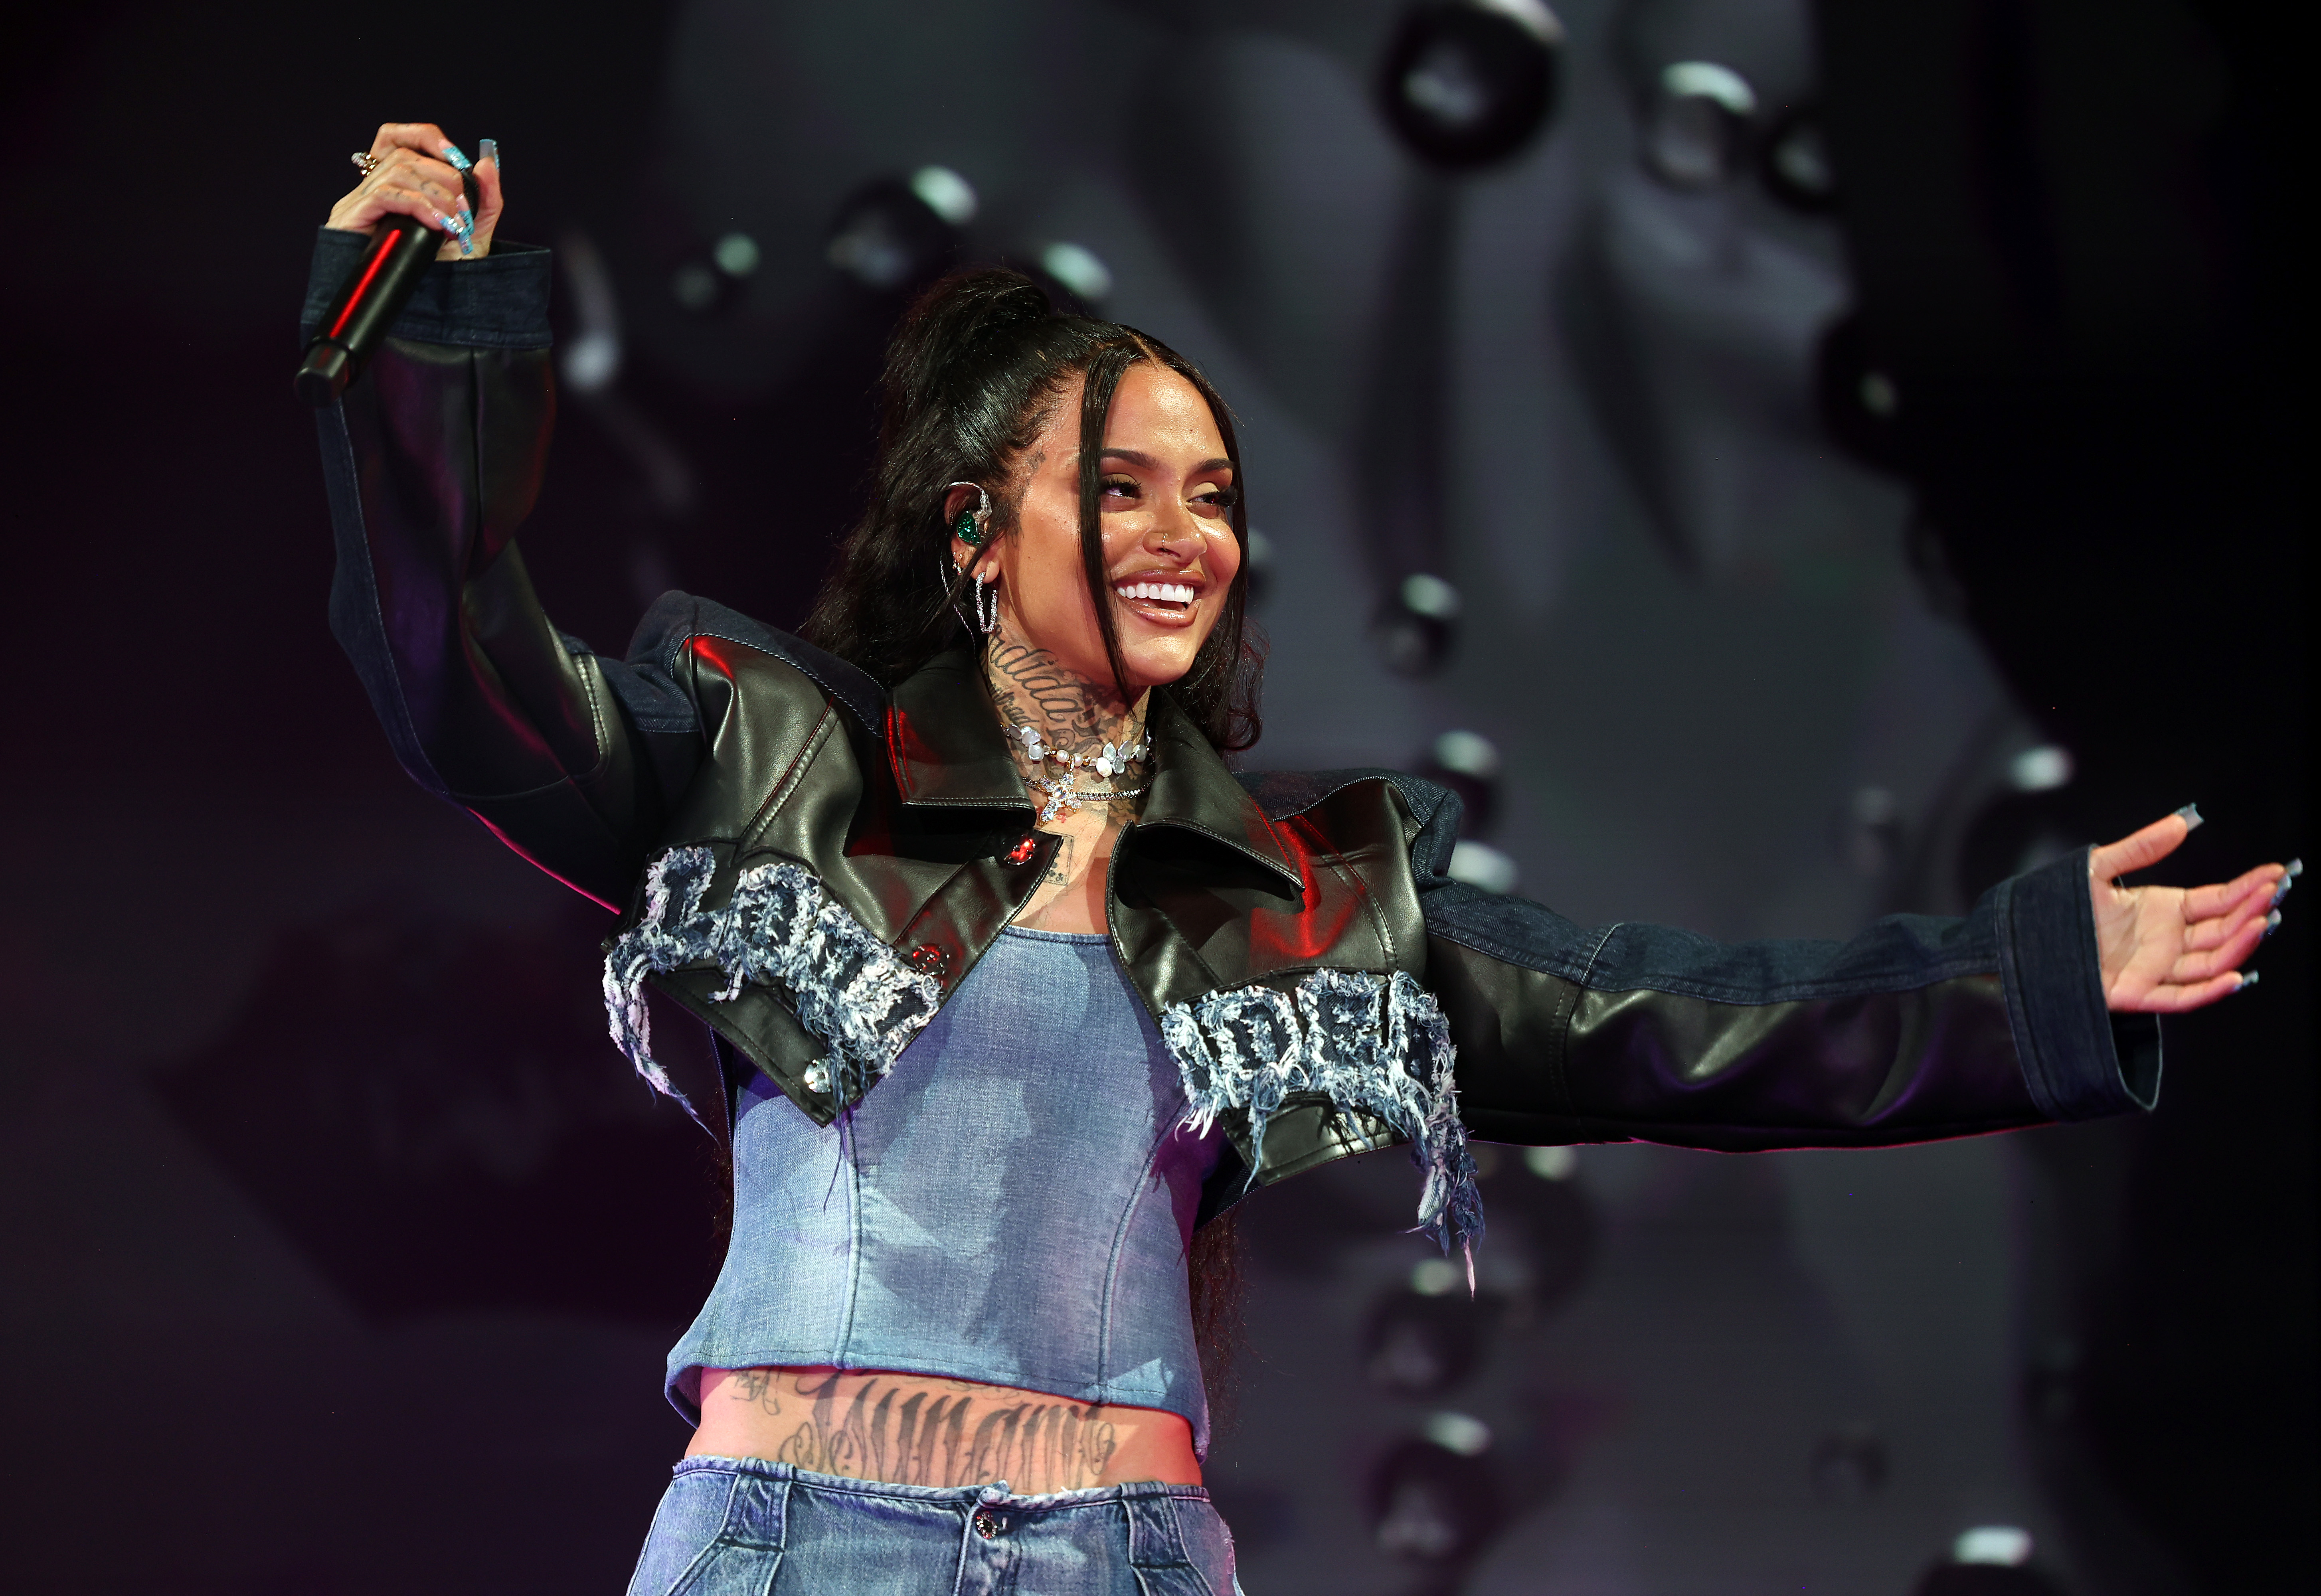 Kehlani performing during the 2023 WNBA All-Star game on July 15, 2023, in Las Vegas, Nevada. | Source: Getty Images